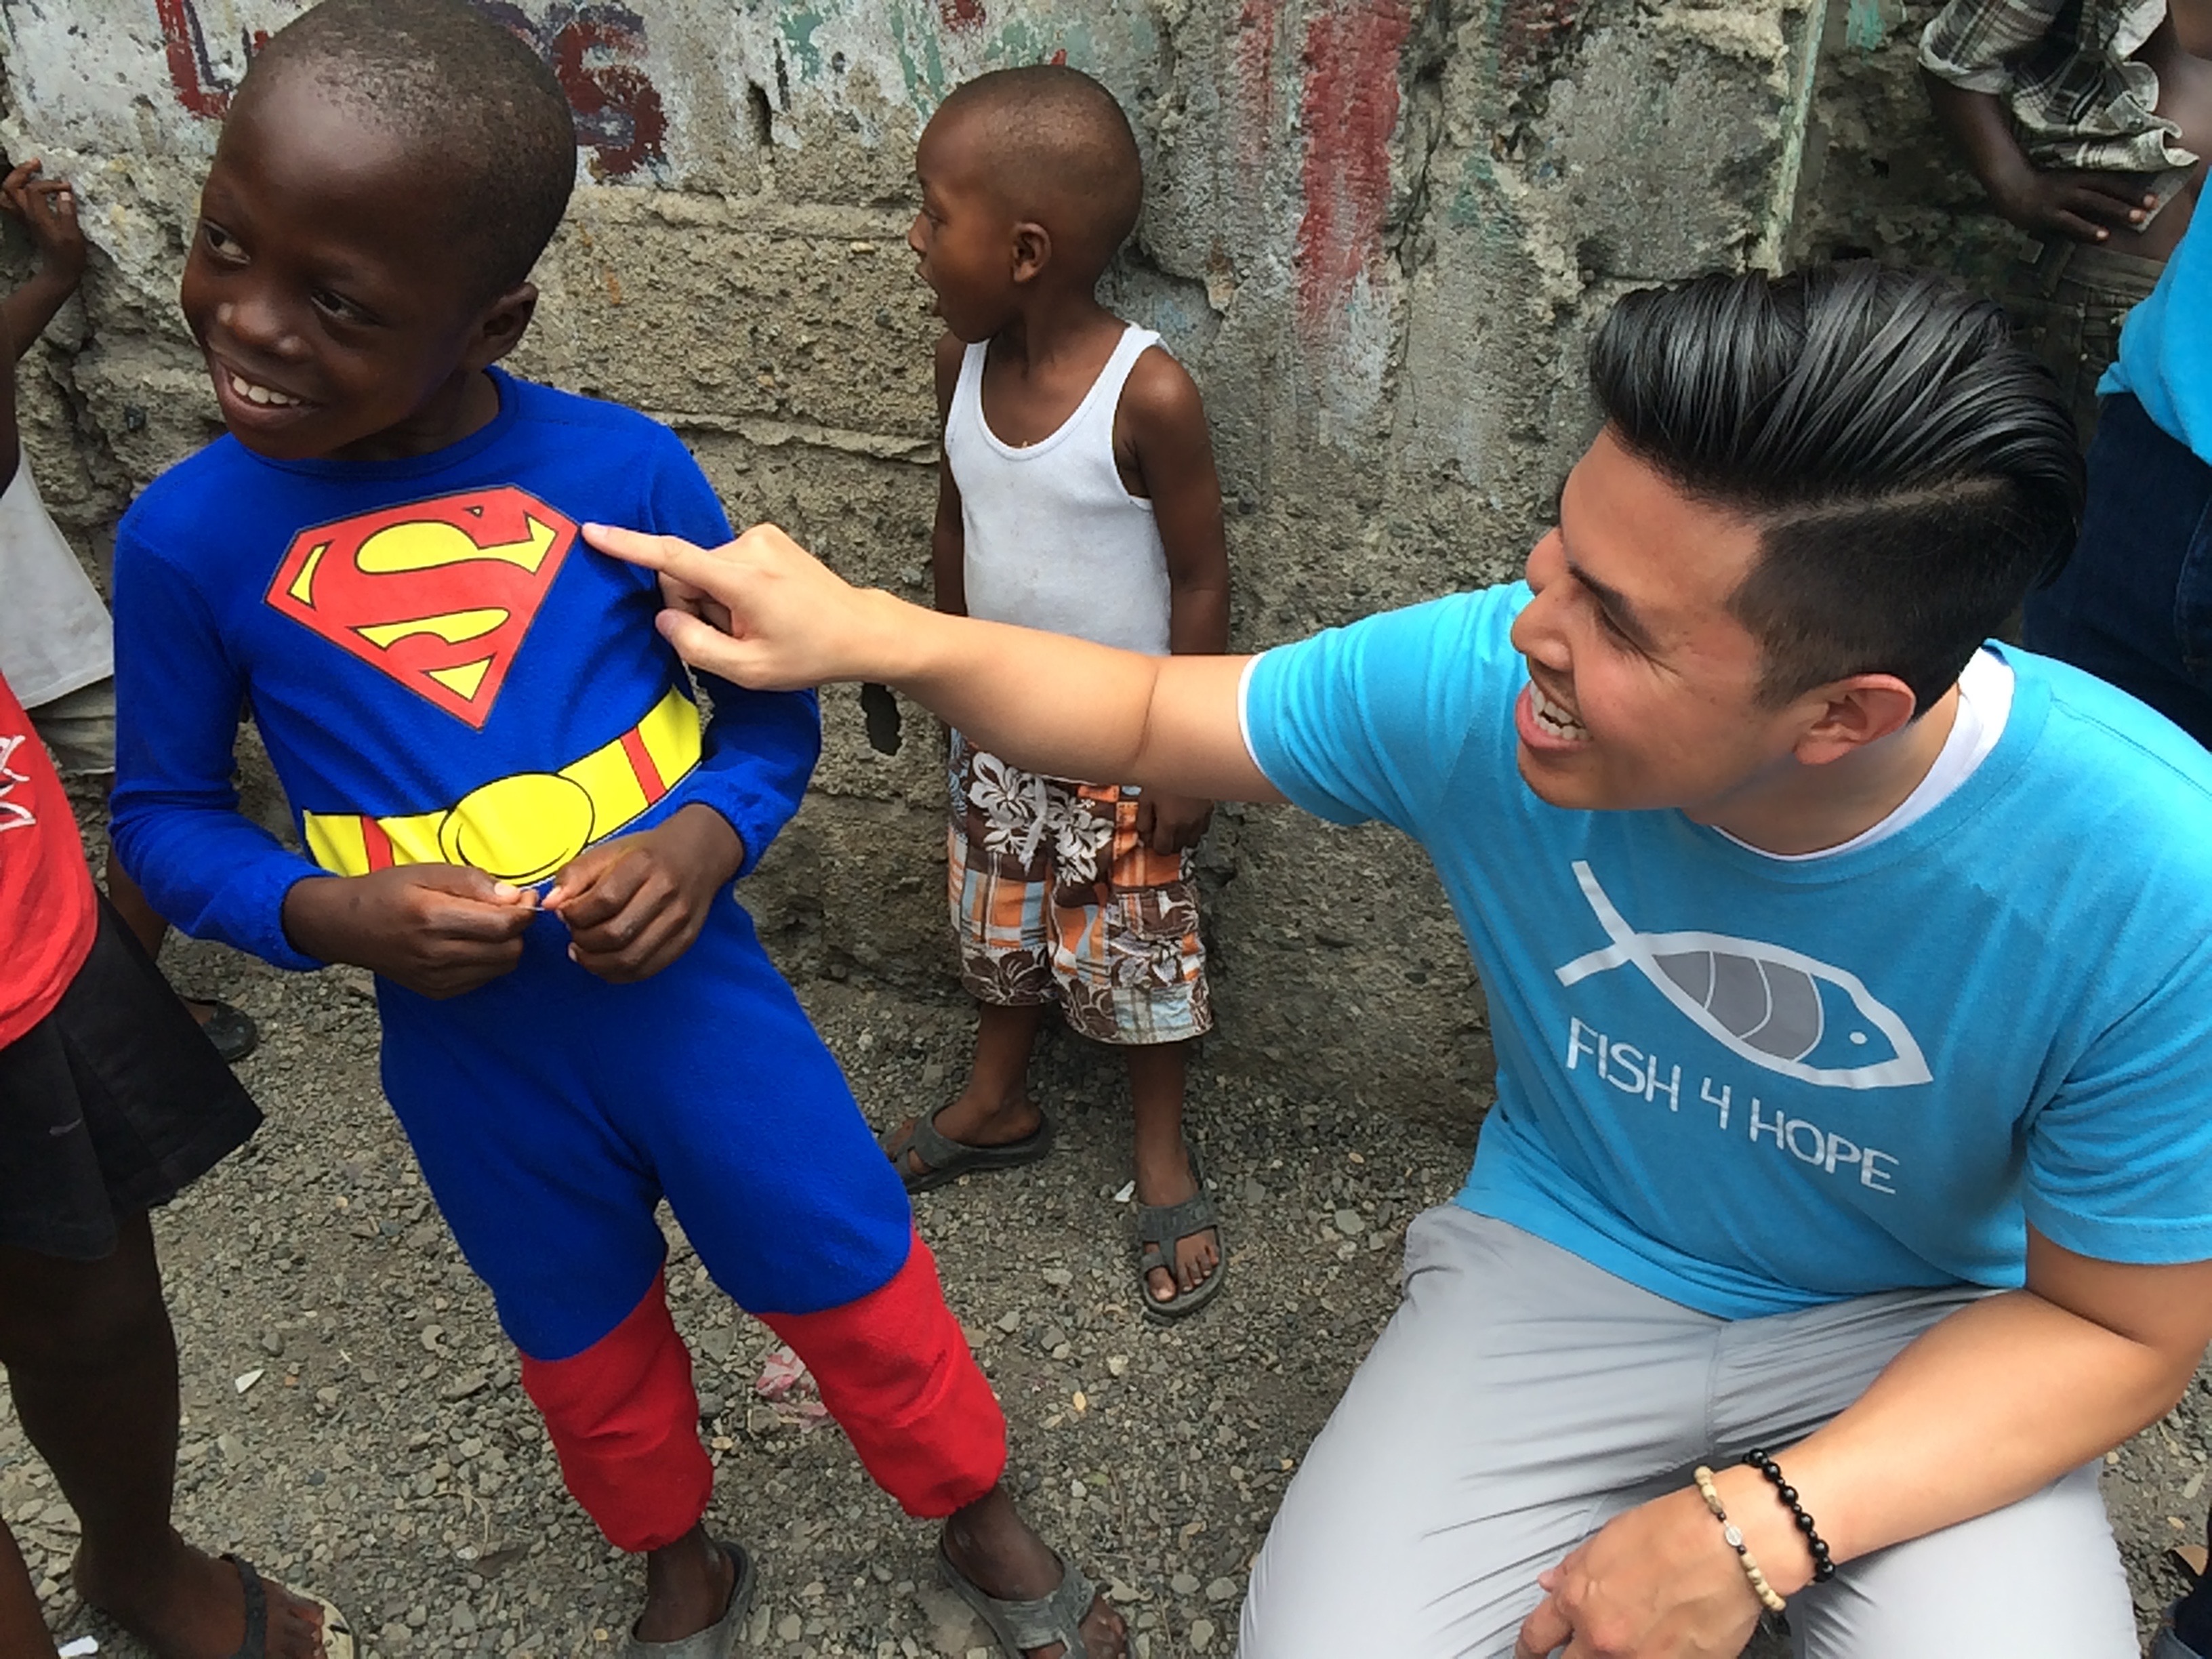 Fish4Hope co-founder Vin poses with Superman